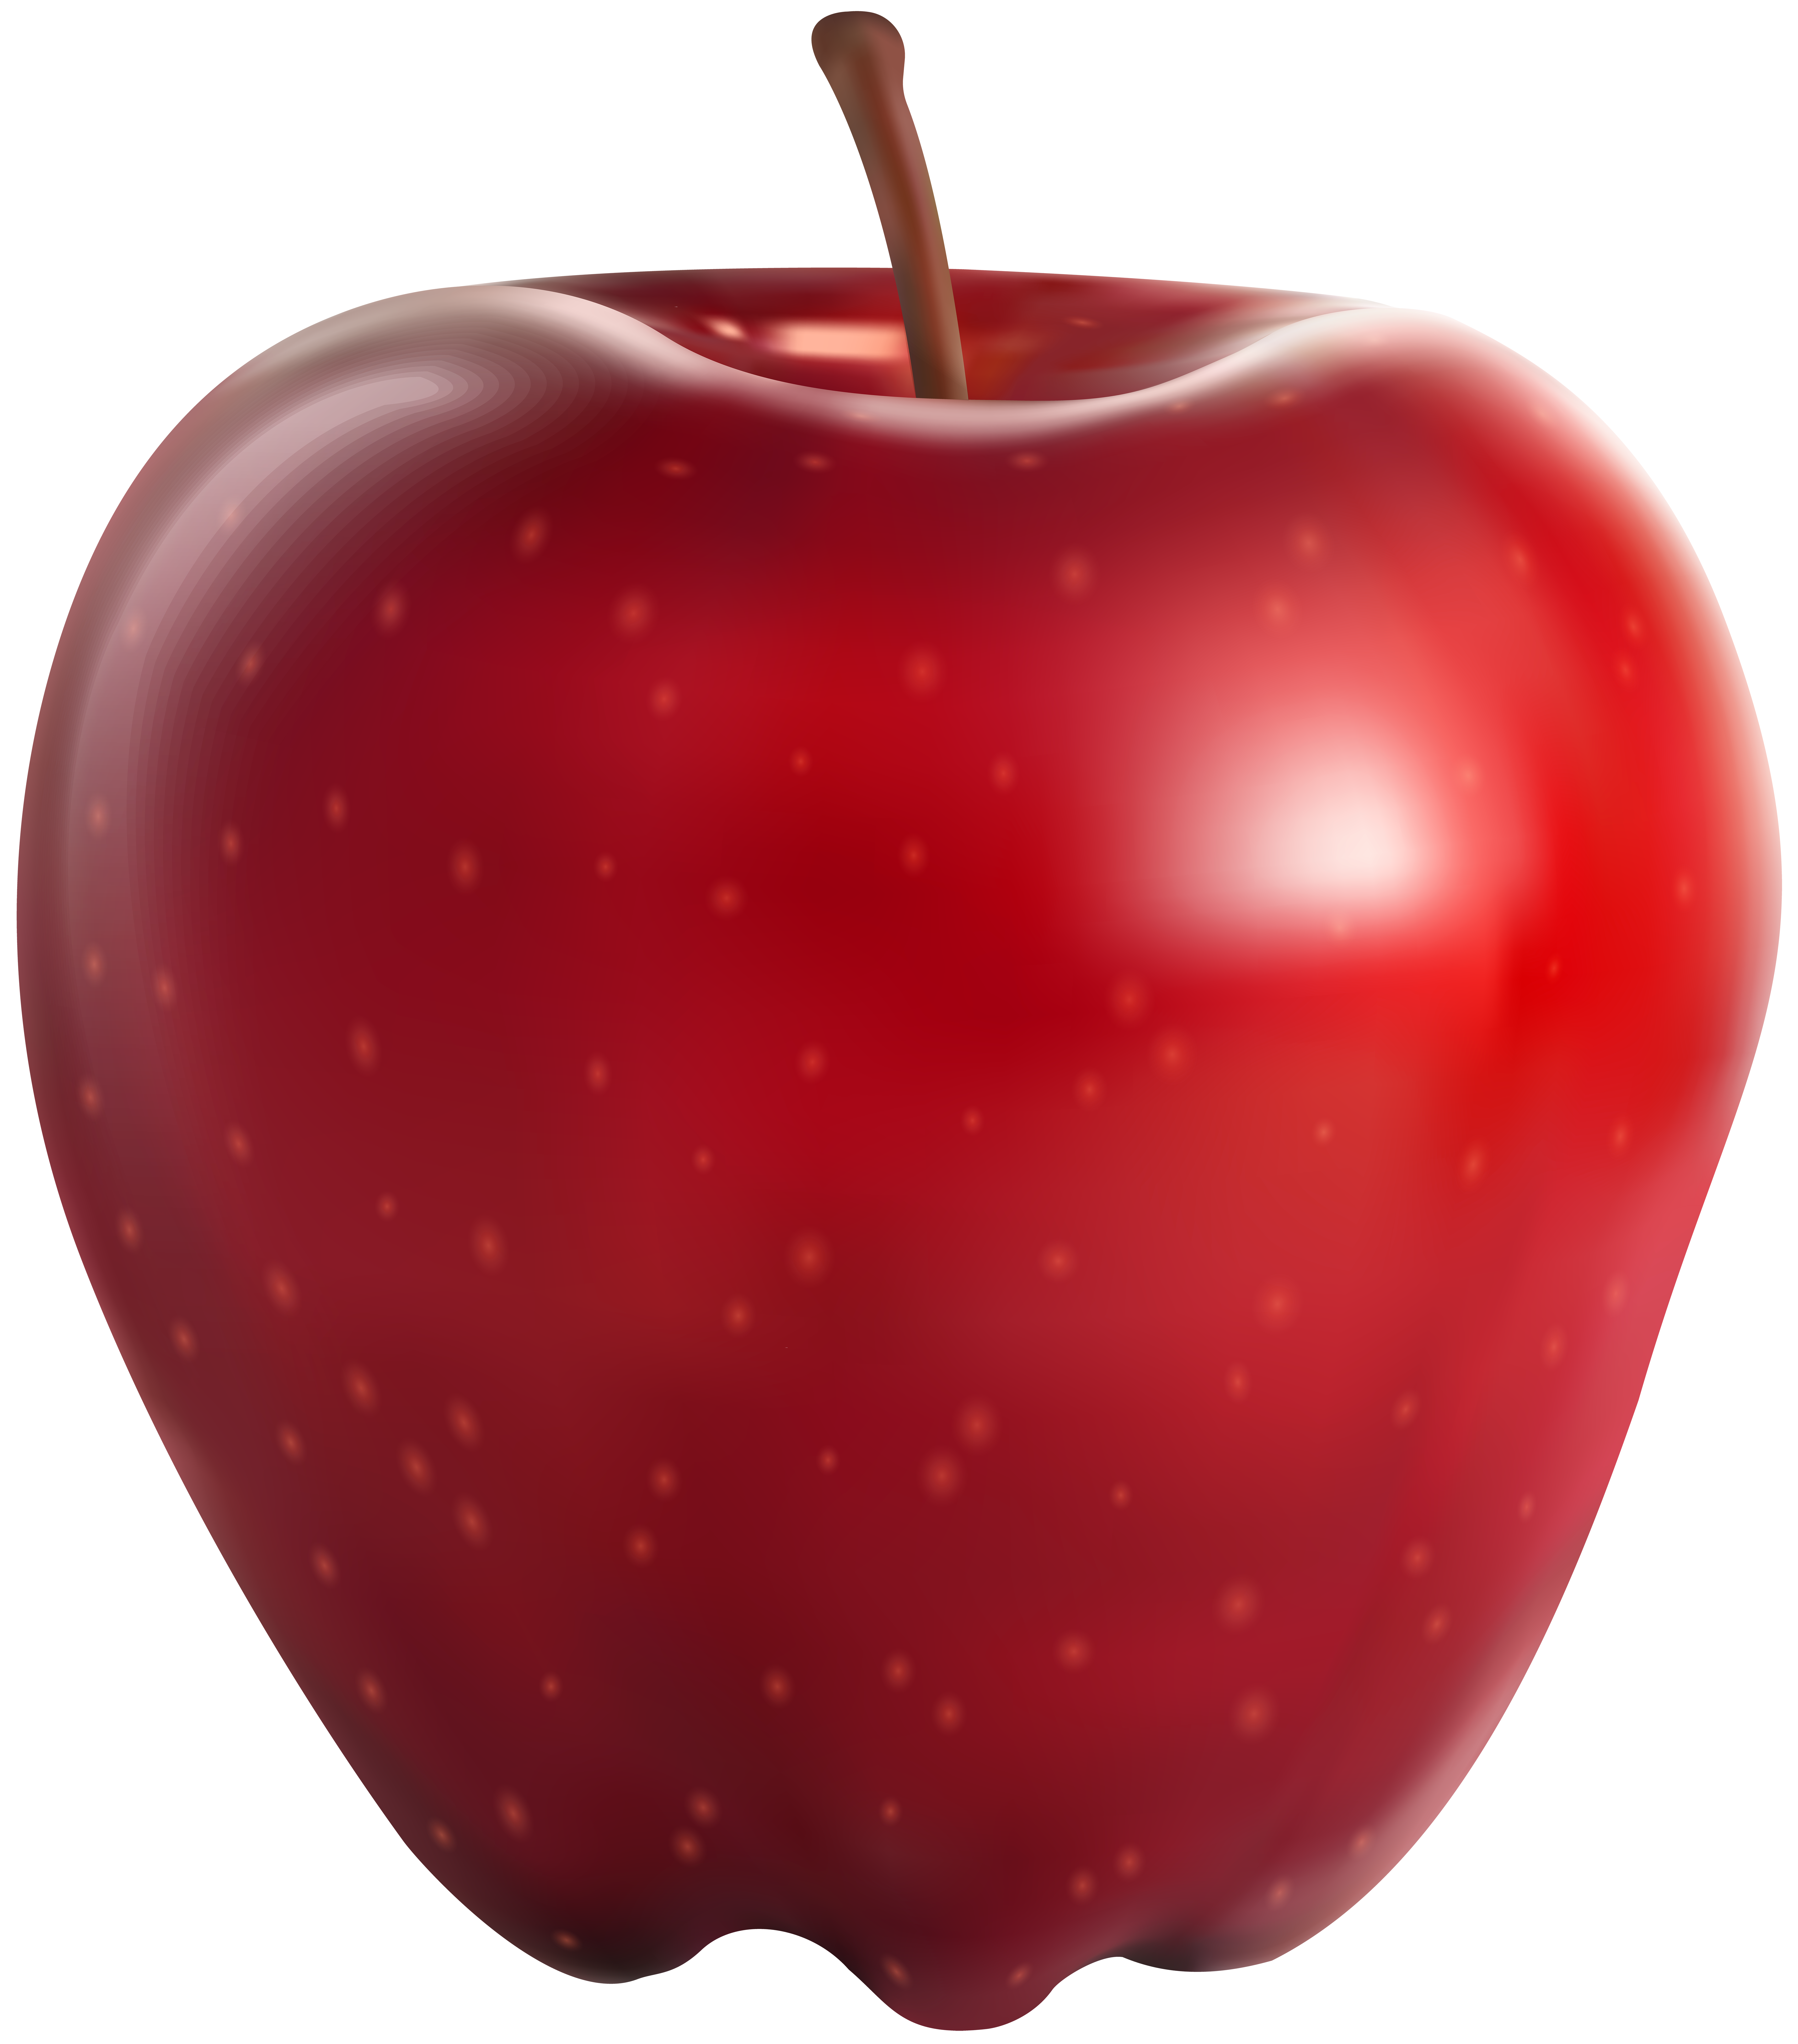 Red Apple Transparent Clip Art Image​ | Gallery Yopriceville - High-Quality  Free Images and Transparent PNG Clipart